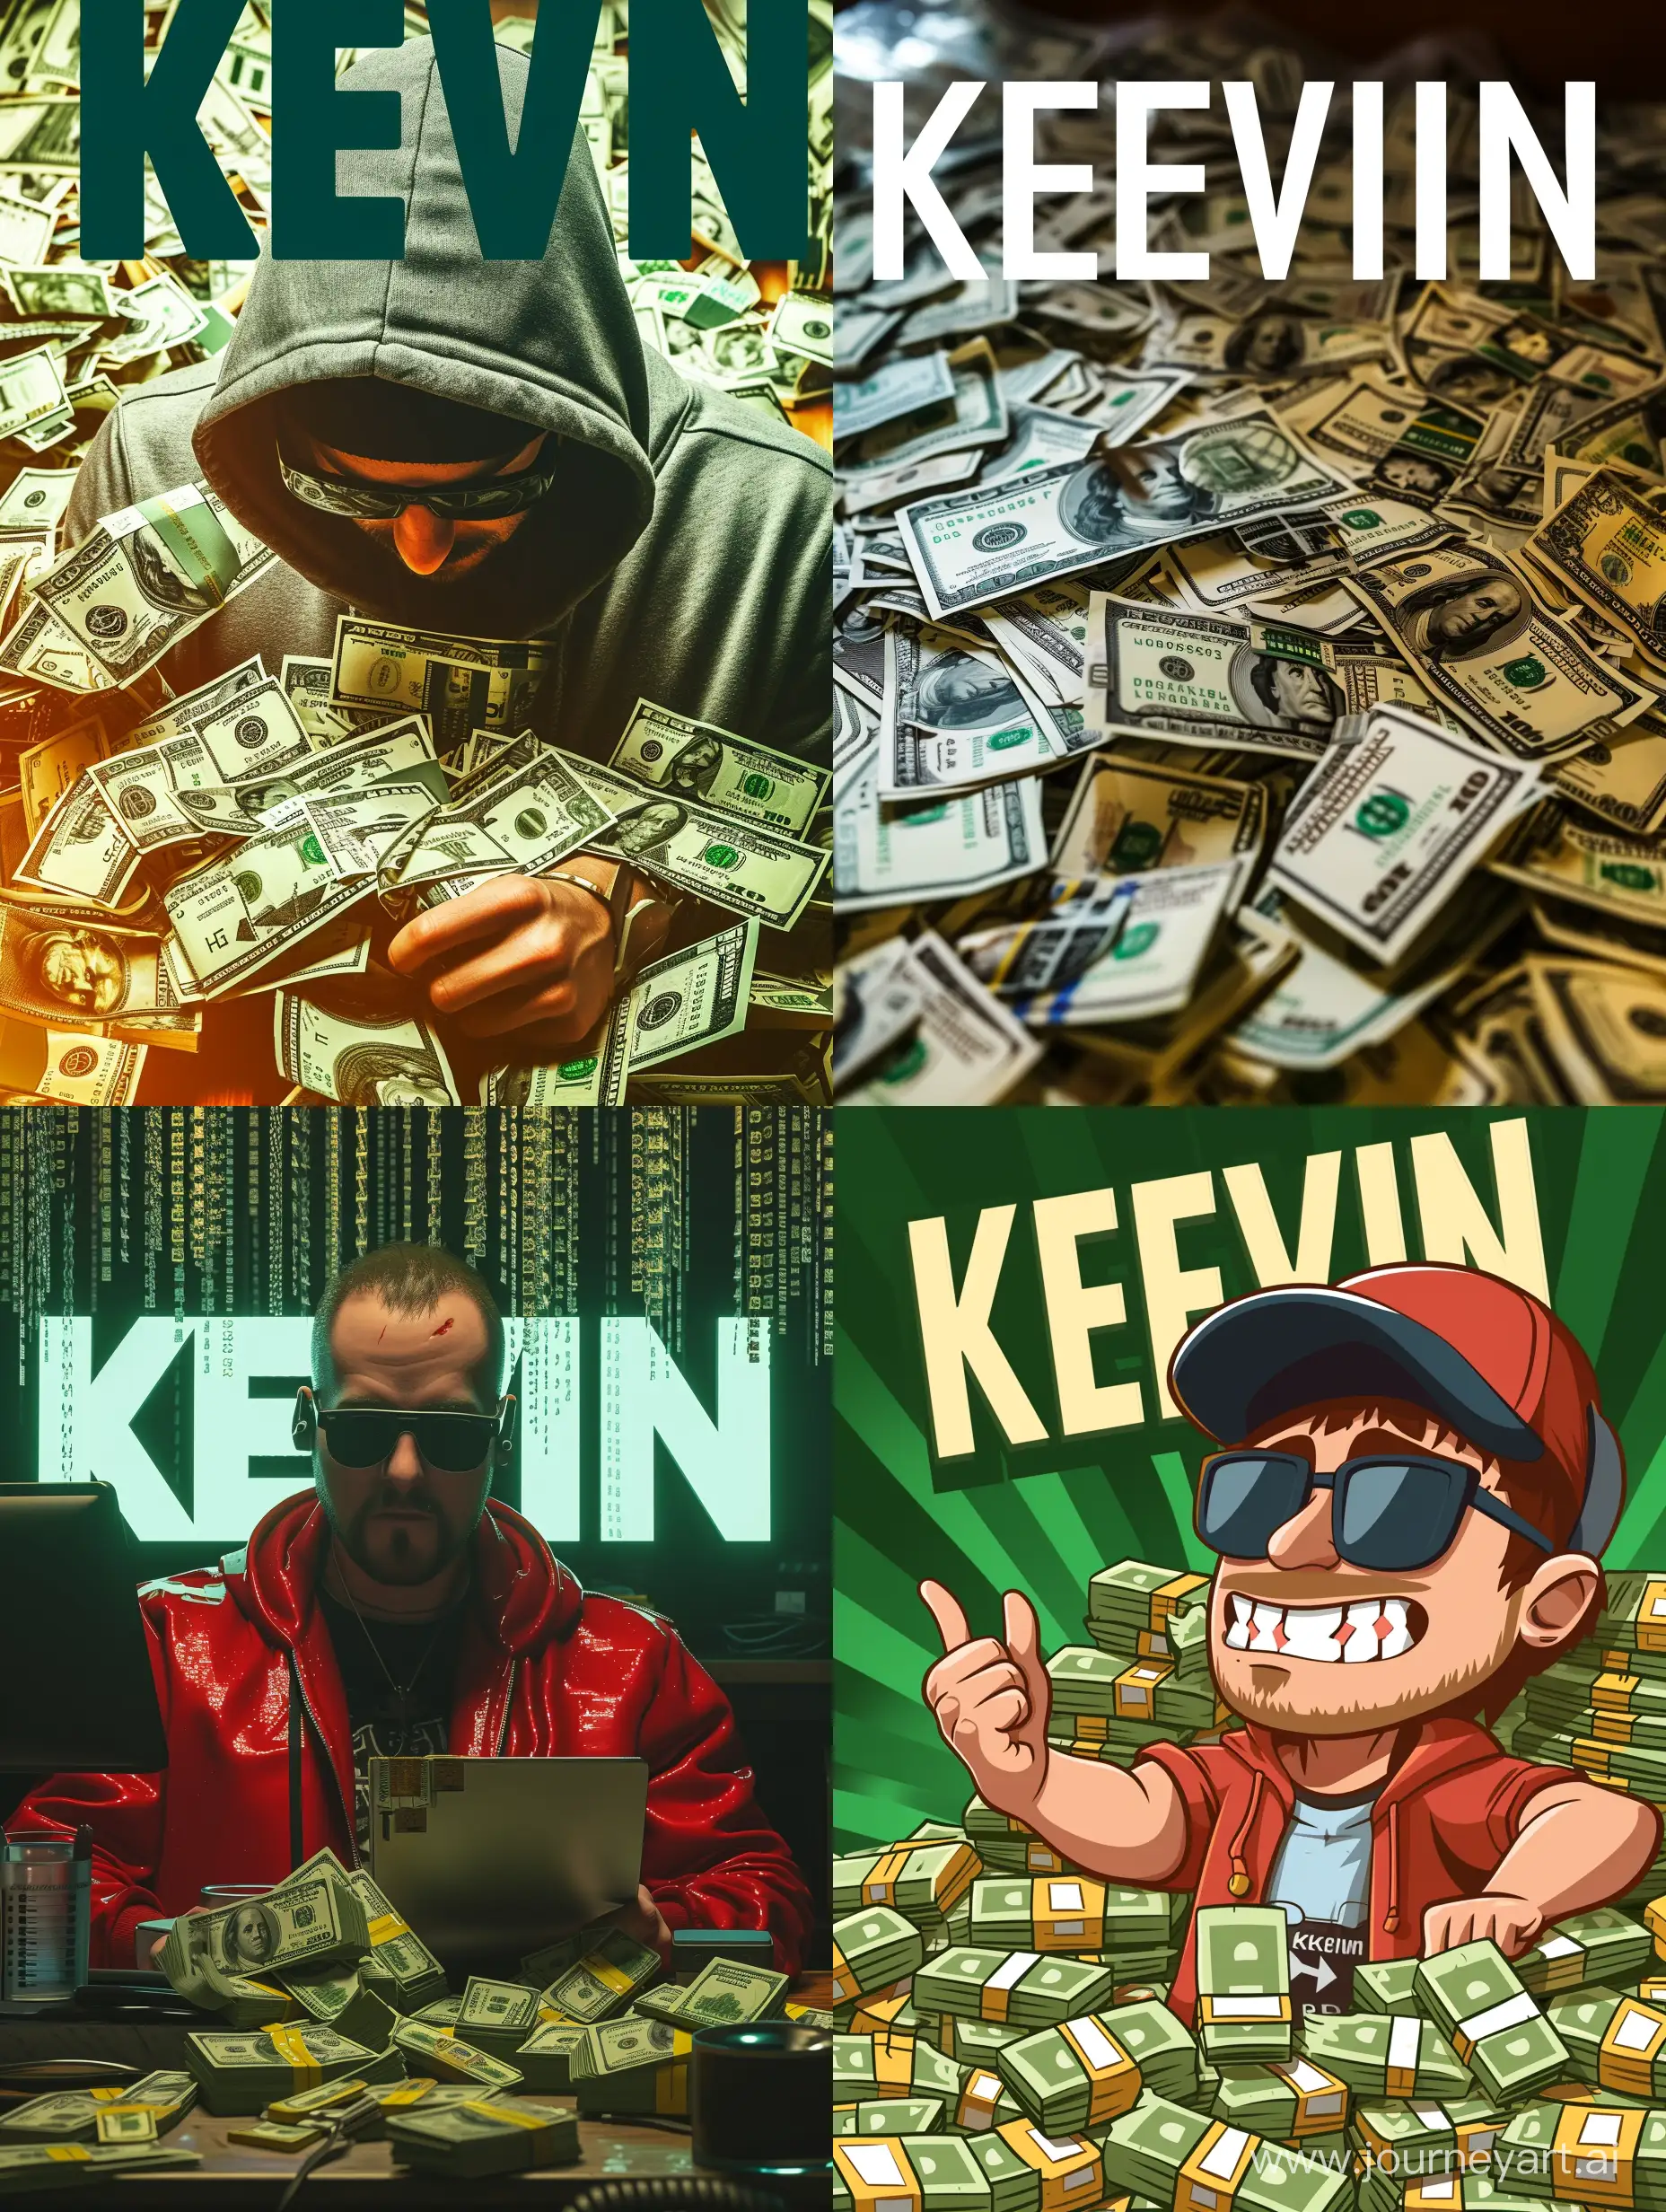 Image of a hacker character, lots of money, with the text KEVIN in the background.